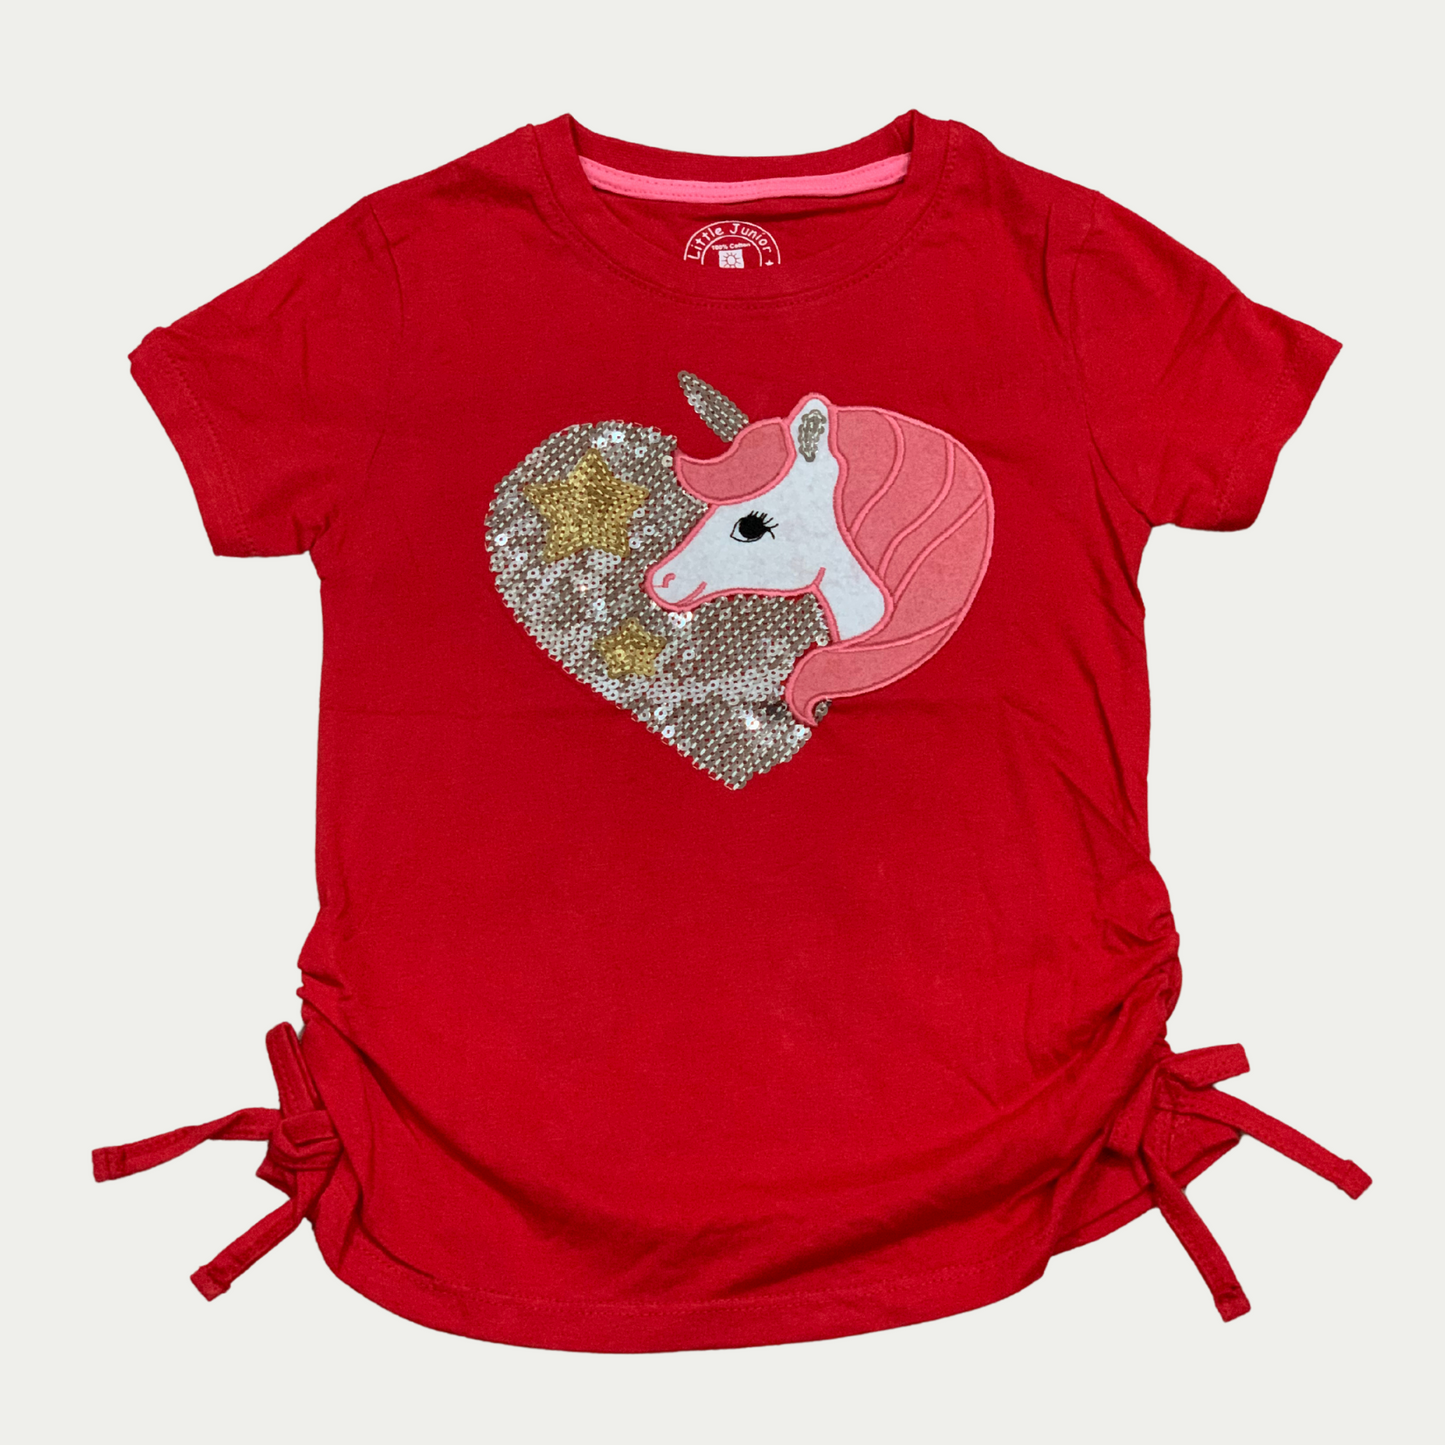 Red Sequence Unicorn Top